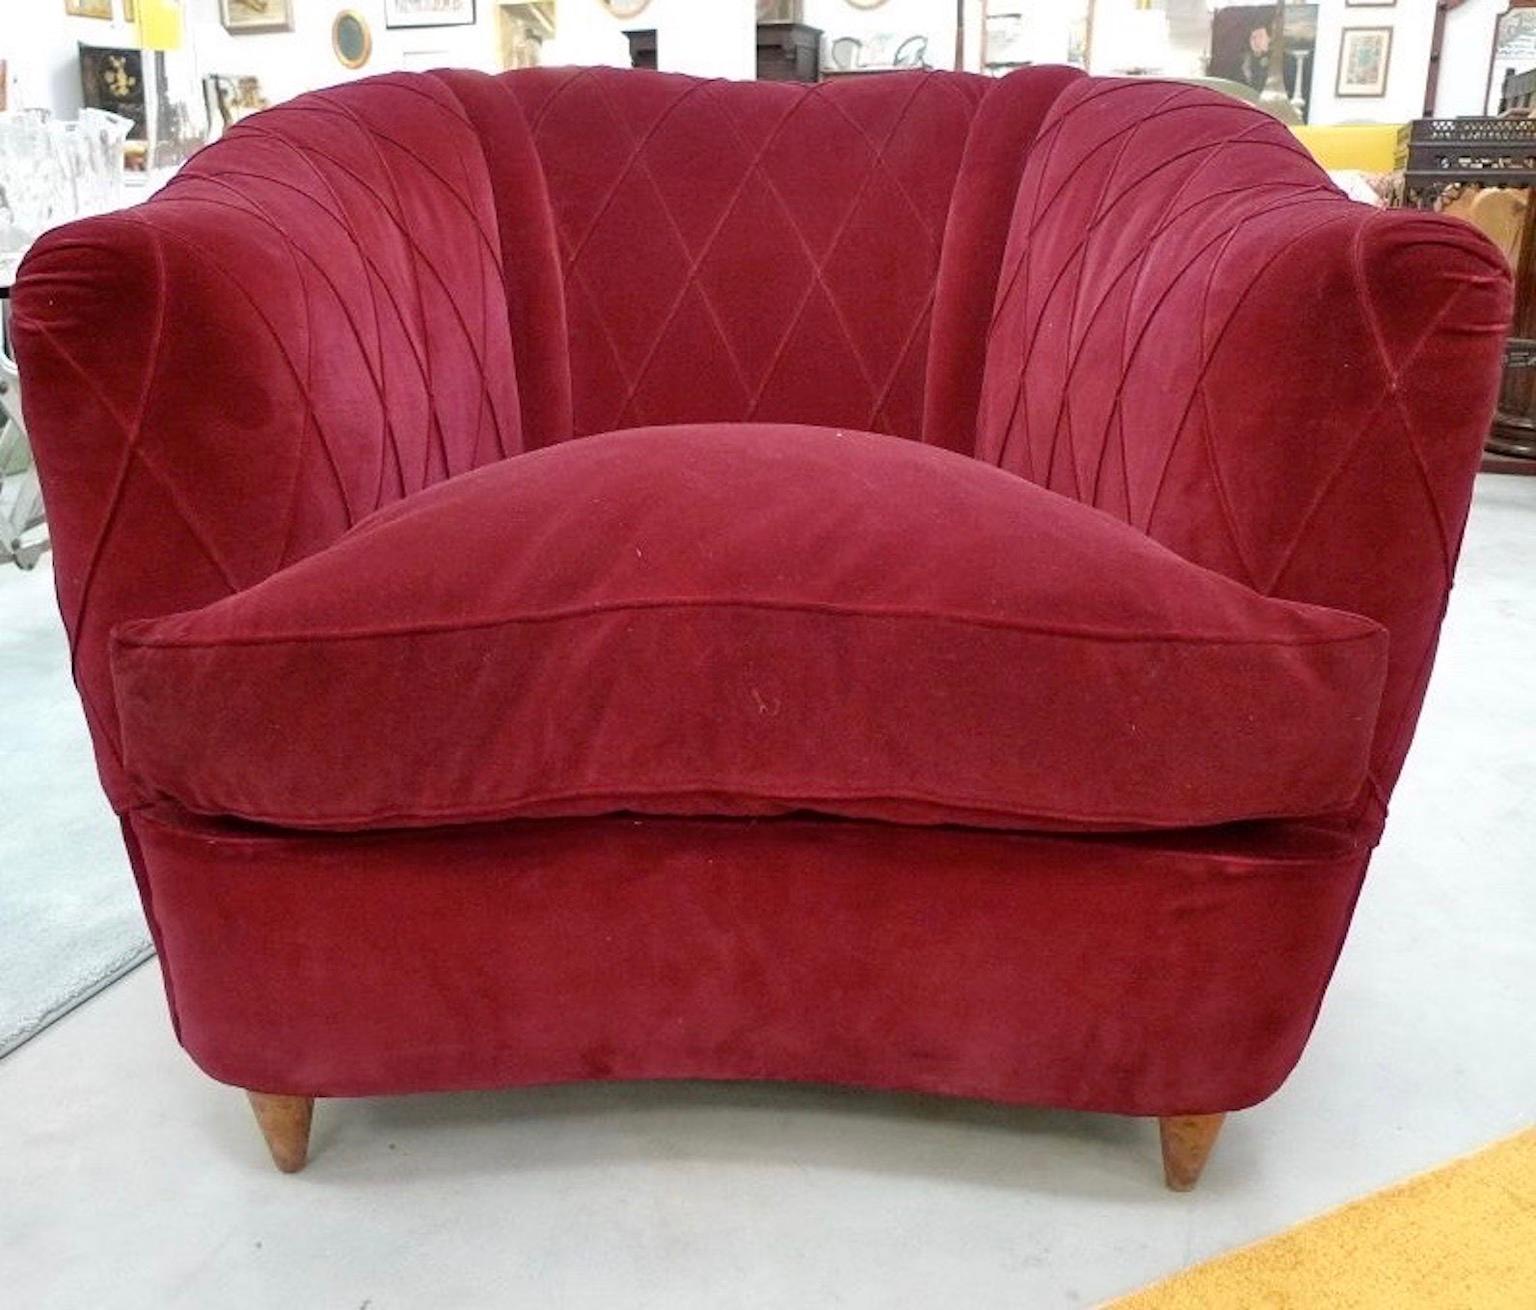 Lovely French 1940s upholstered armchair in curved-back form with distinctive croisillon diamond-shaped stitching on the burgundy velvet. 
Plump loose seat cushion filled with down feathers.
Tapered wood conical legs.

Companion sofa is sold.